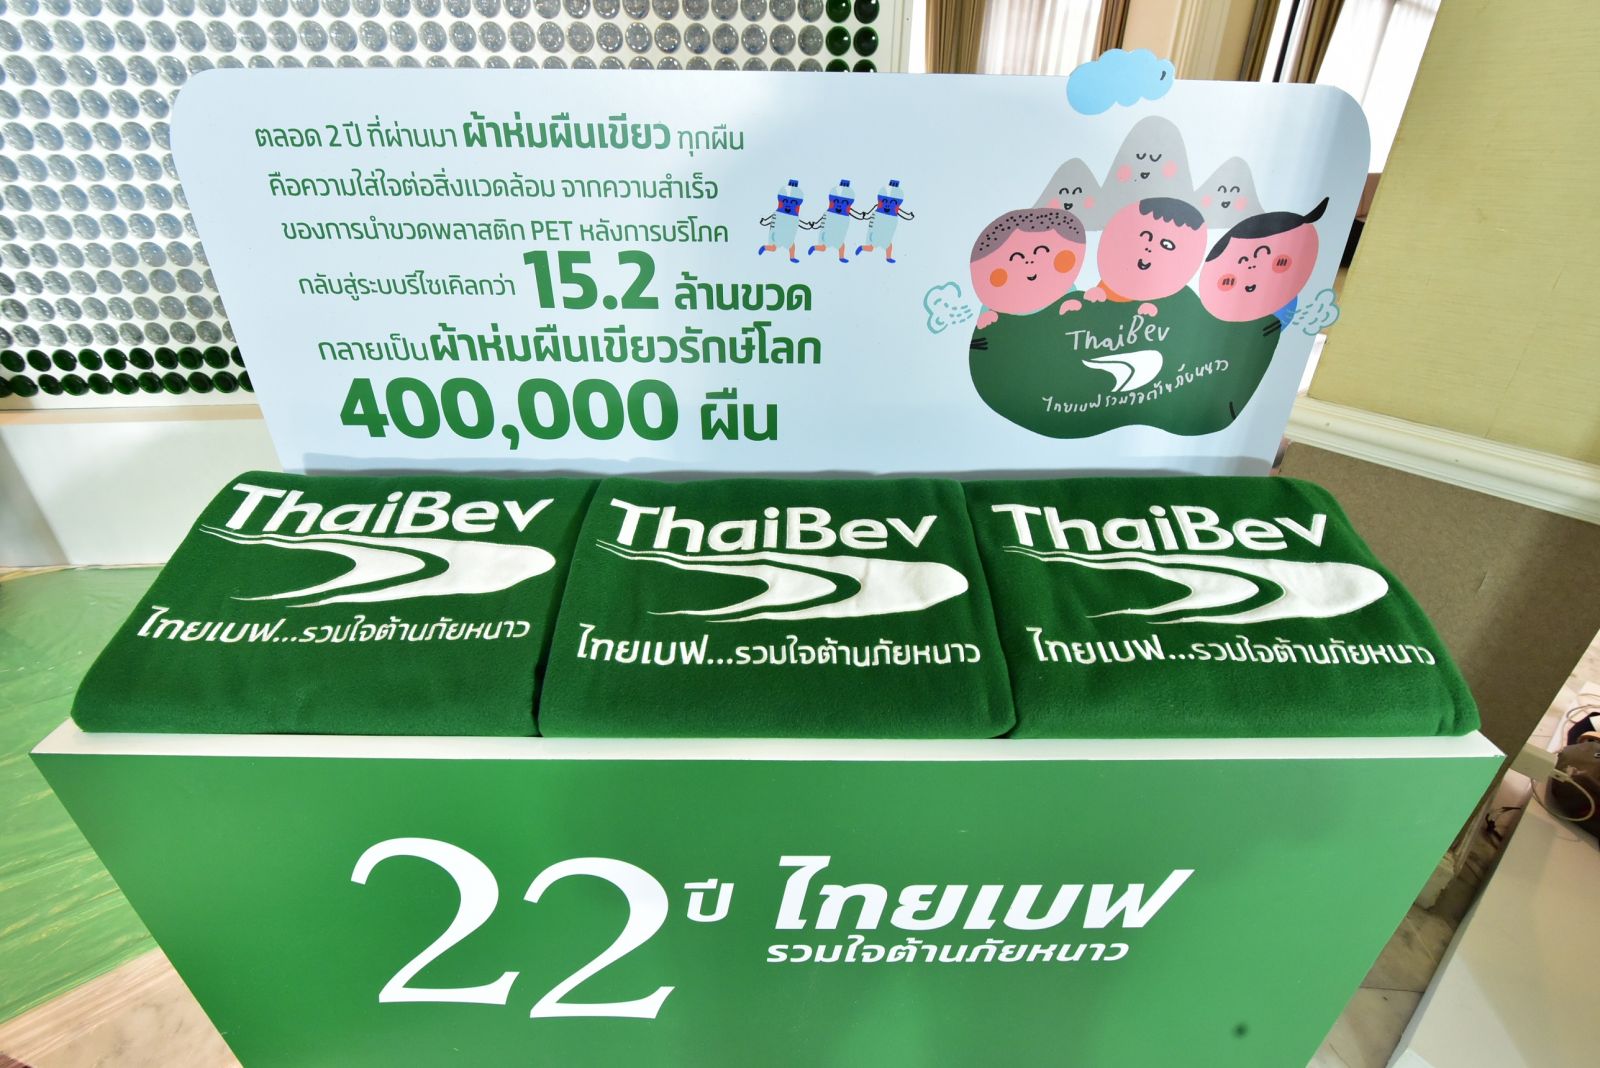 ThaiBev Donates 200,000 “Green” Blankets to Remote Villagers